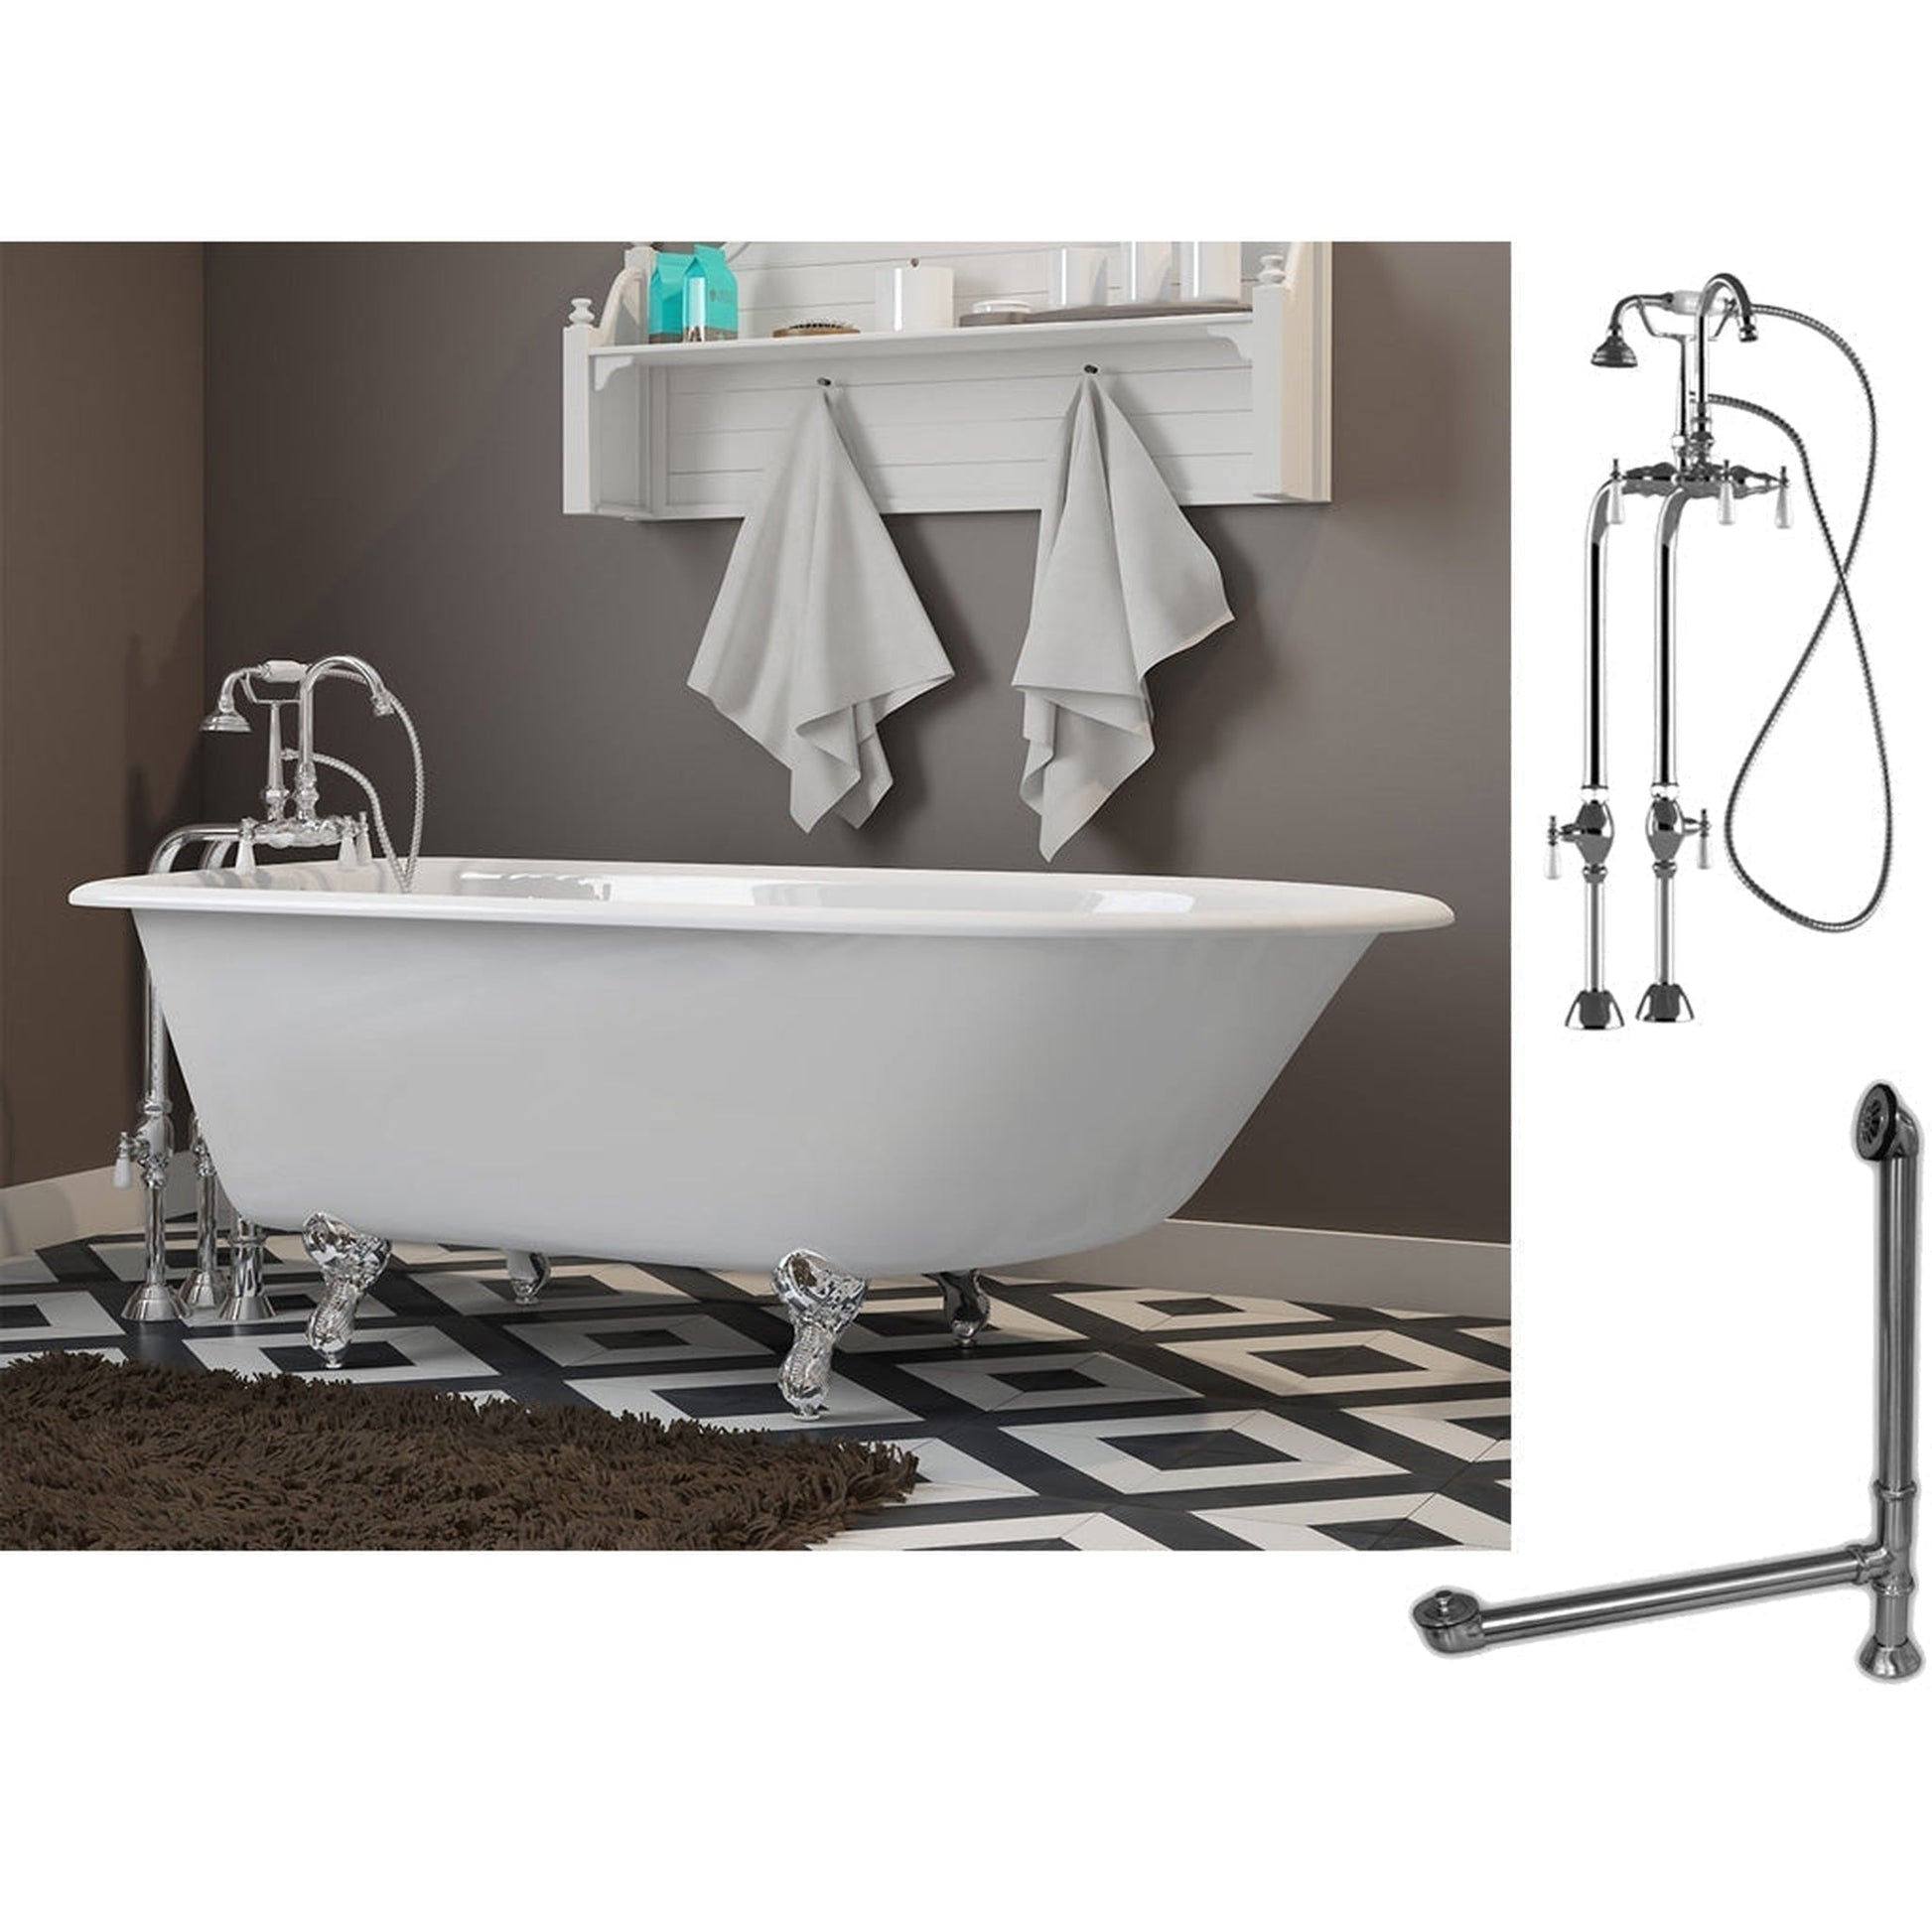 Cambridge Plumbing 54" White Cast Iron Rolled Rim Clawfoot Bathtub With No Deck Holes And Complete Plumbing Package Including Freestanding English Telephone Gooseneck Faucet, Drain And Overflow Assembly In Polished Chrome